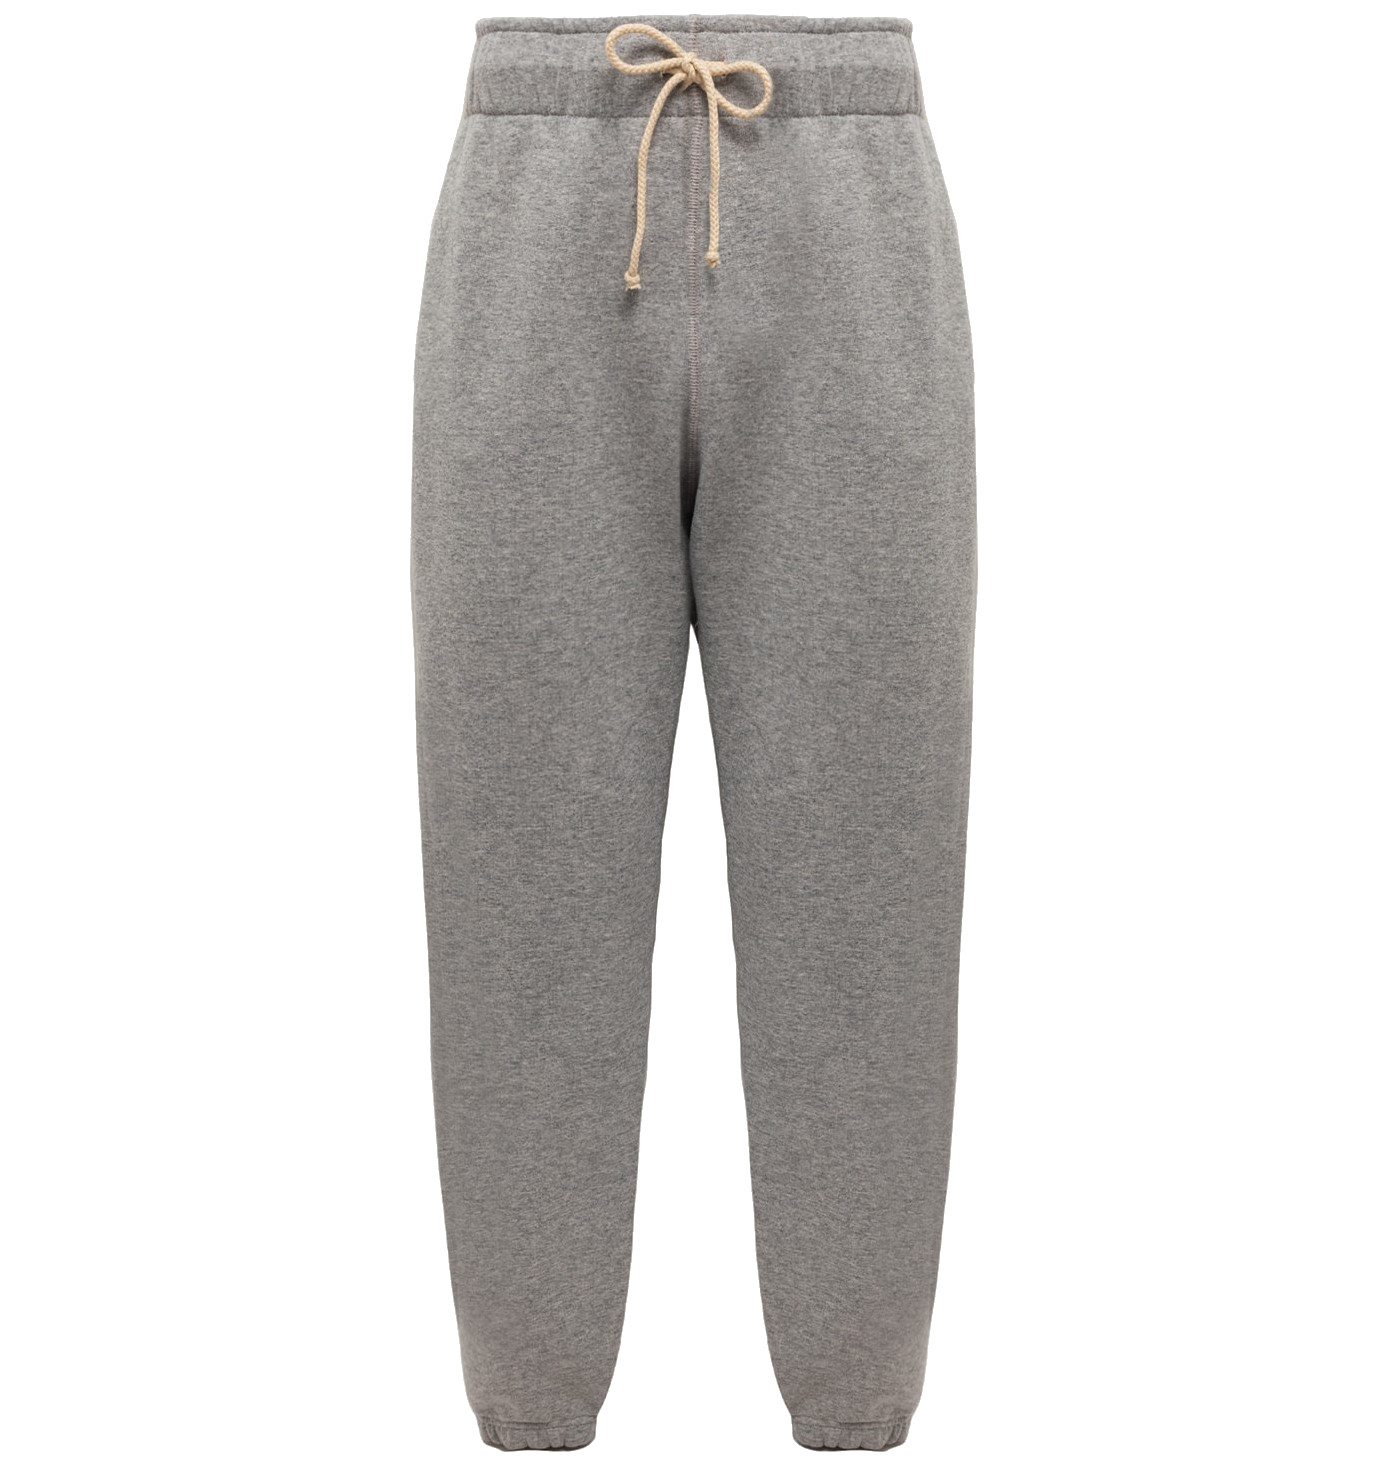 AUTRY ACTION PEOPLE Ease Sweatpant in Grey Melange